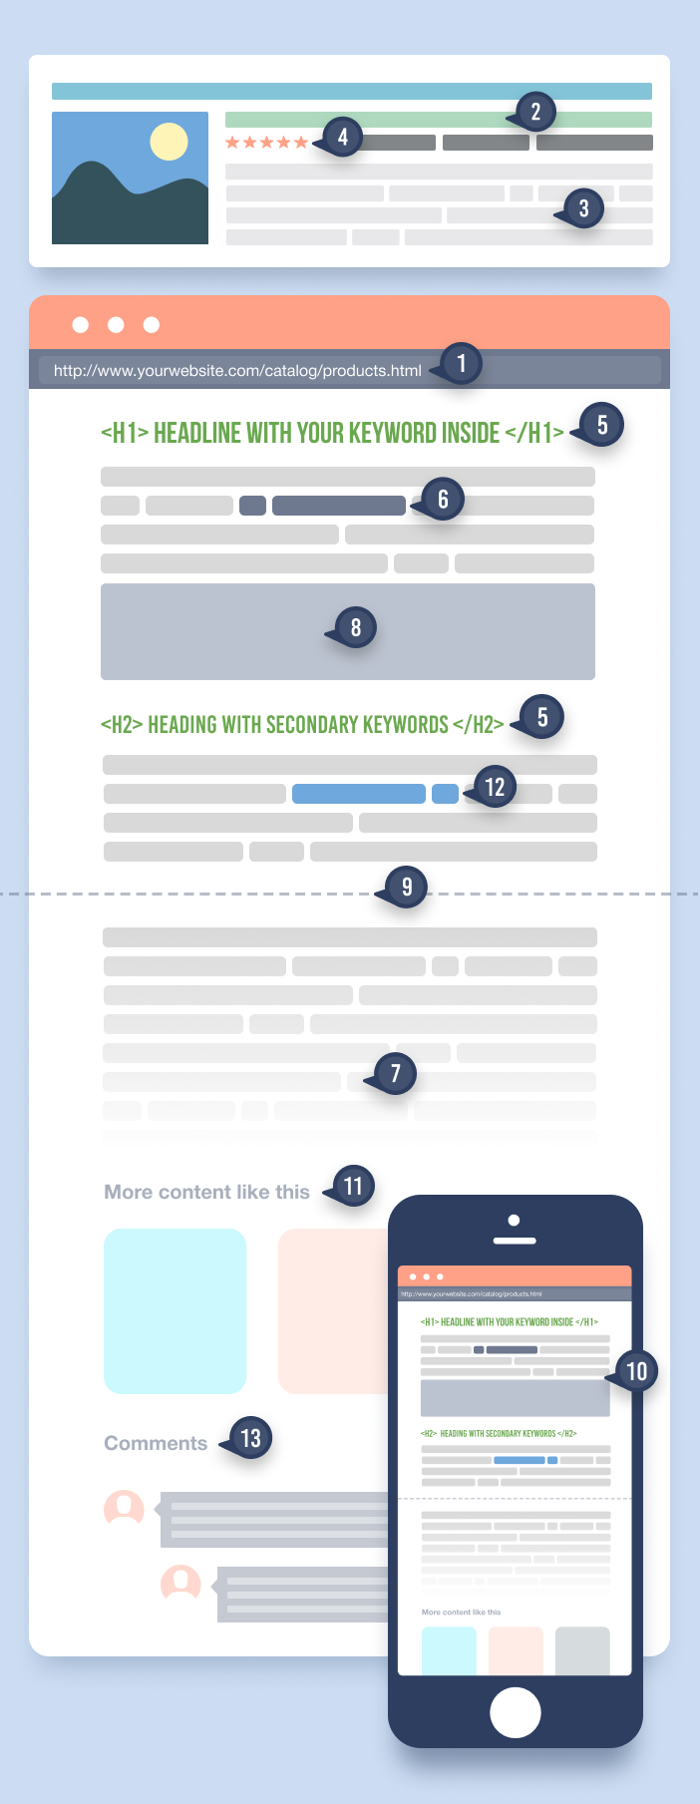 Anatomy of a perfectly optimized landing page